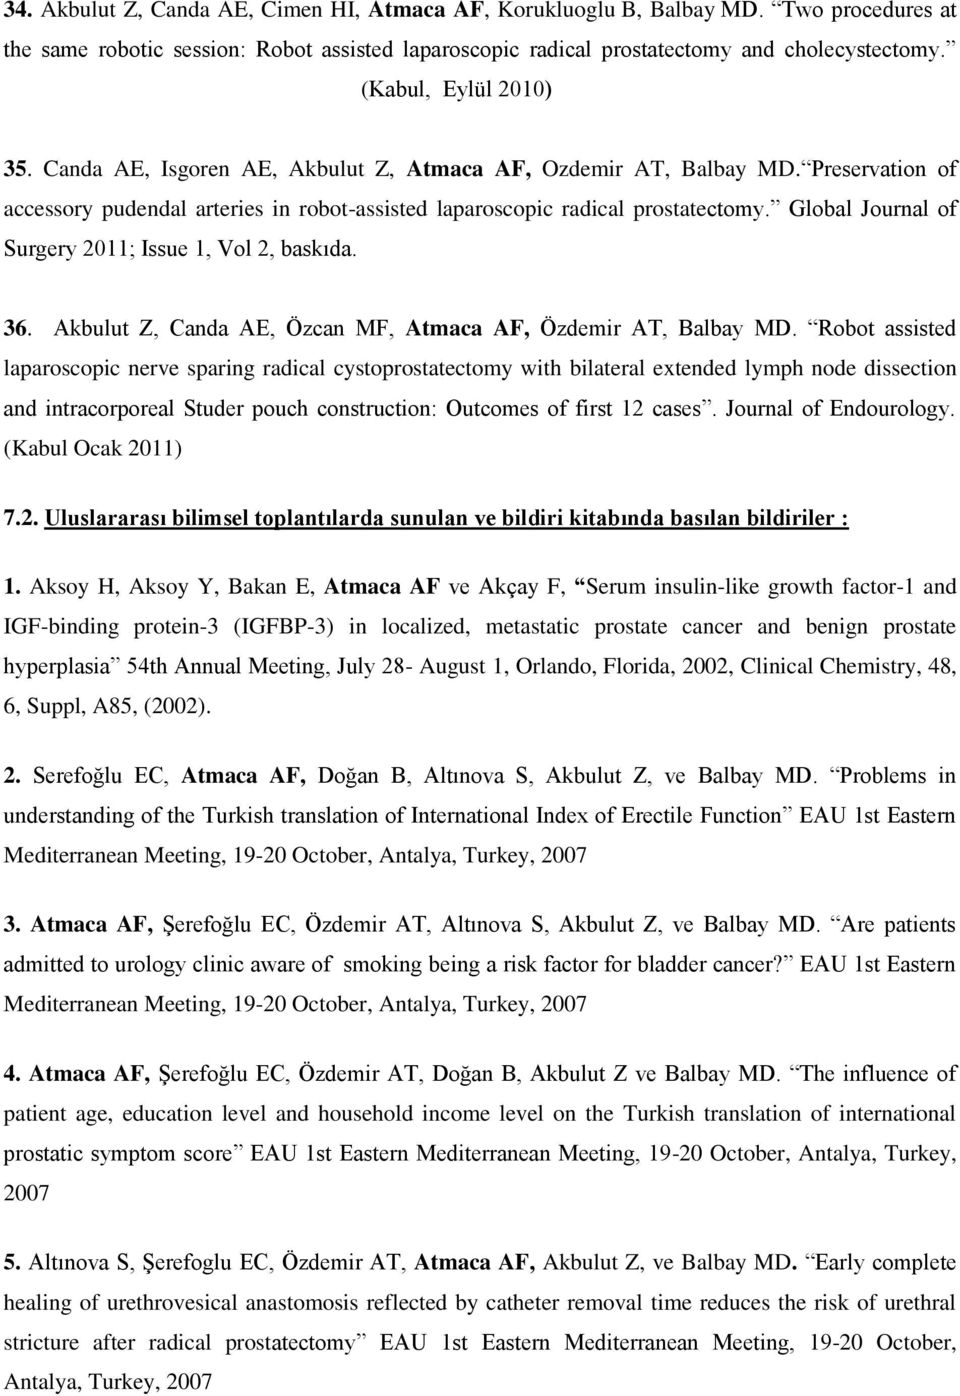 Preservation of accessory pudendal arteries in robot-assisted laparoscopic radical prostatectomy. Global Journal of Surgery 2011; Issue 1, Vol 2, baskıda. 36.